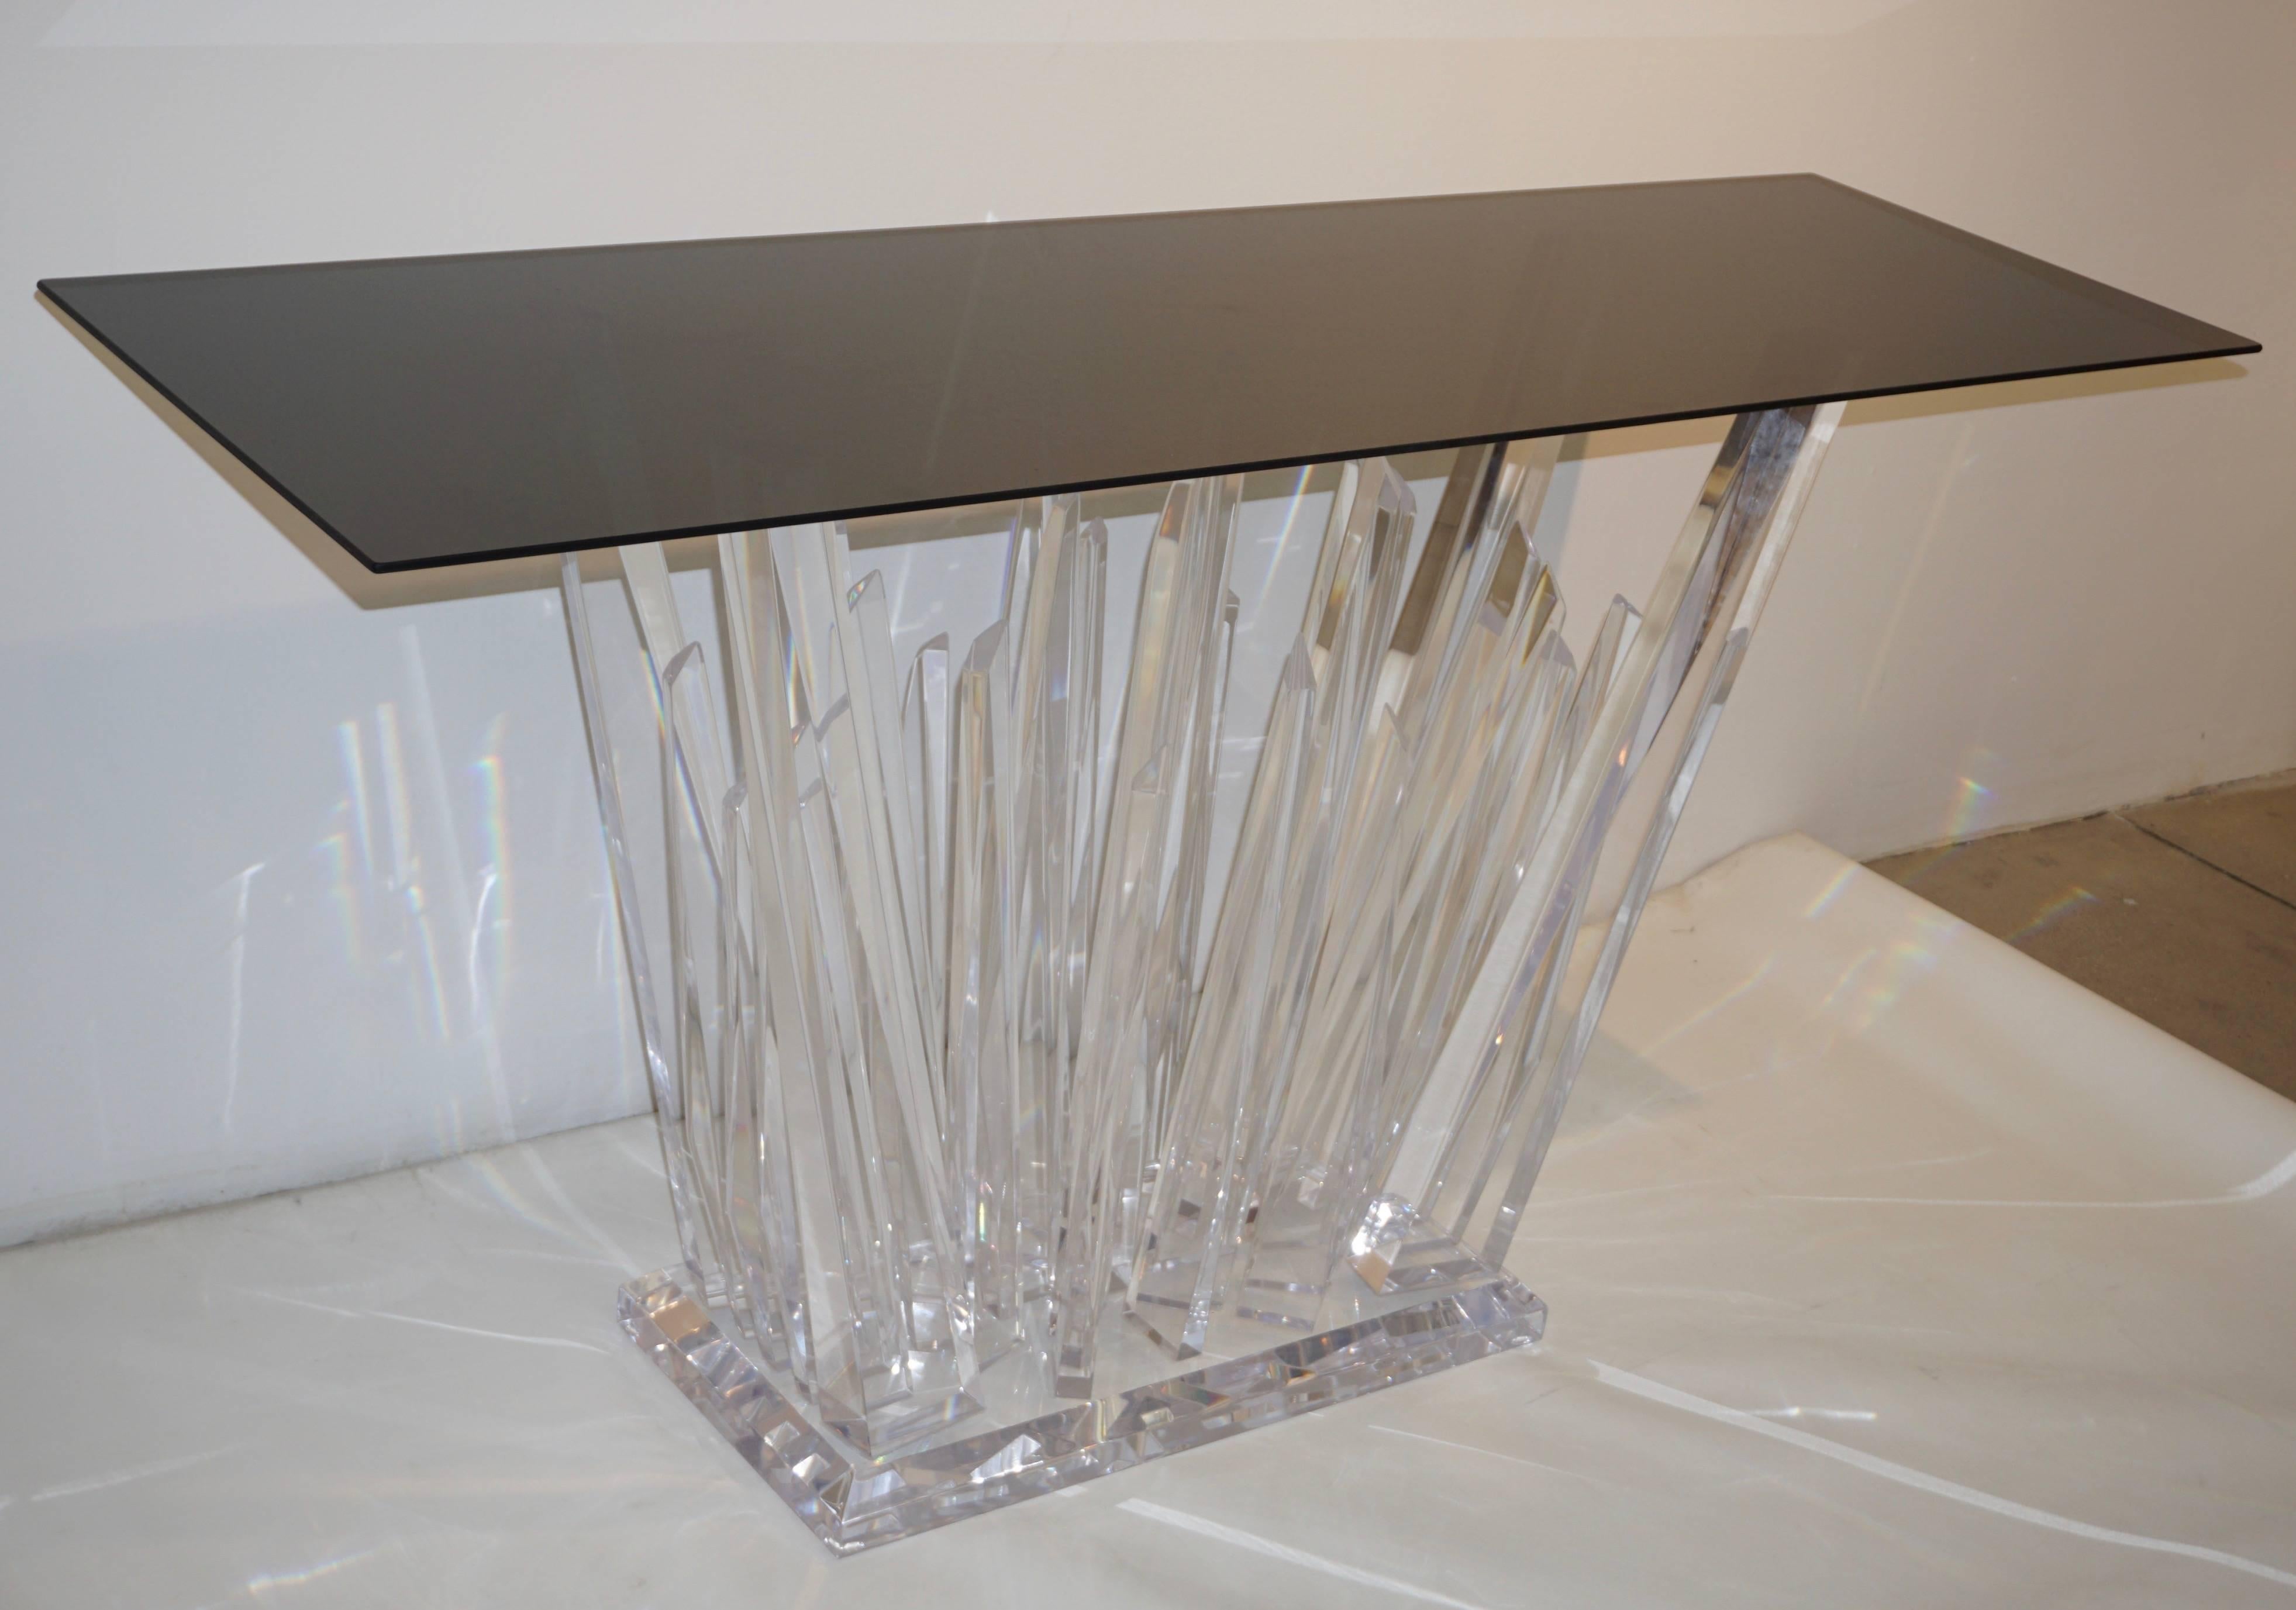 A very attractive and fun contemporary acrylic central console table in high quality clear plexiglass that looks like rock glass, the exclusive modern abstract decor raised on a deep bevelled plinth gives movement and texture to this sculpture piece